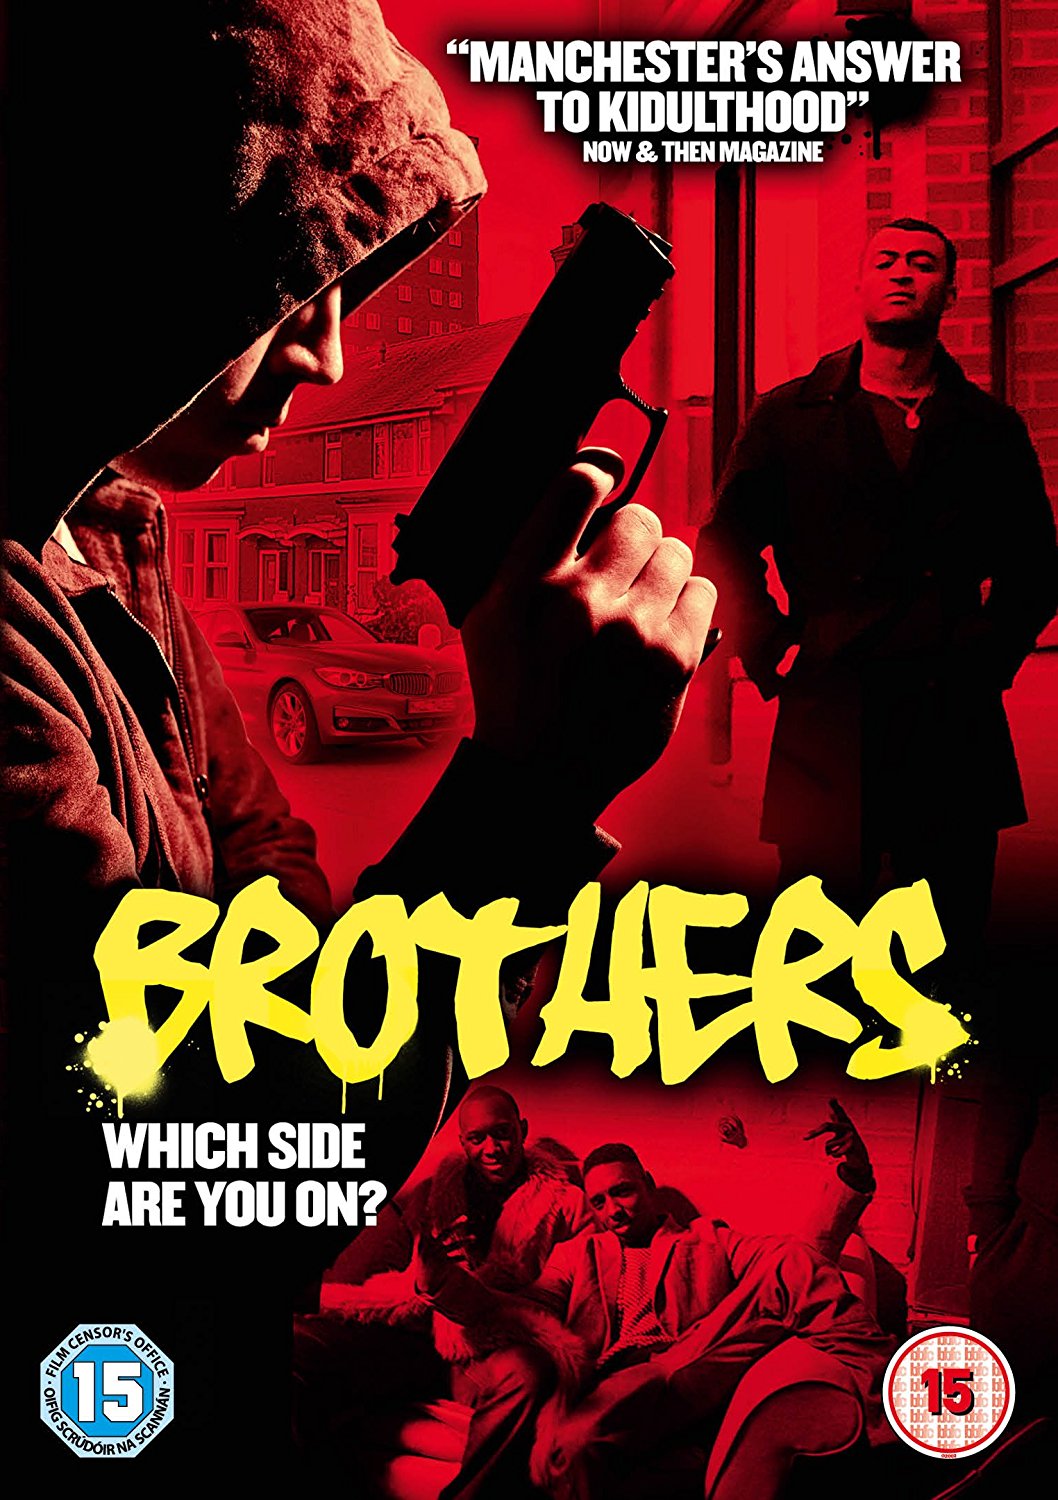 Brothers (DVD)